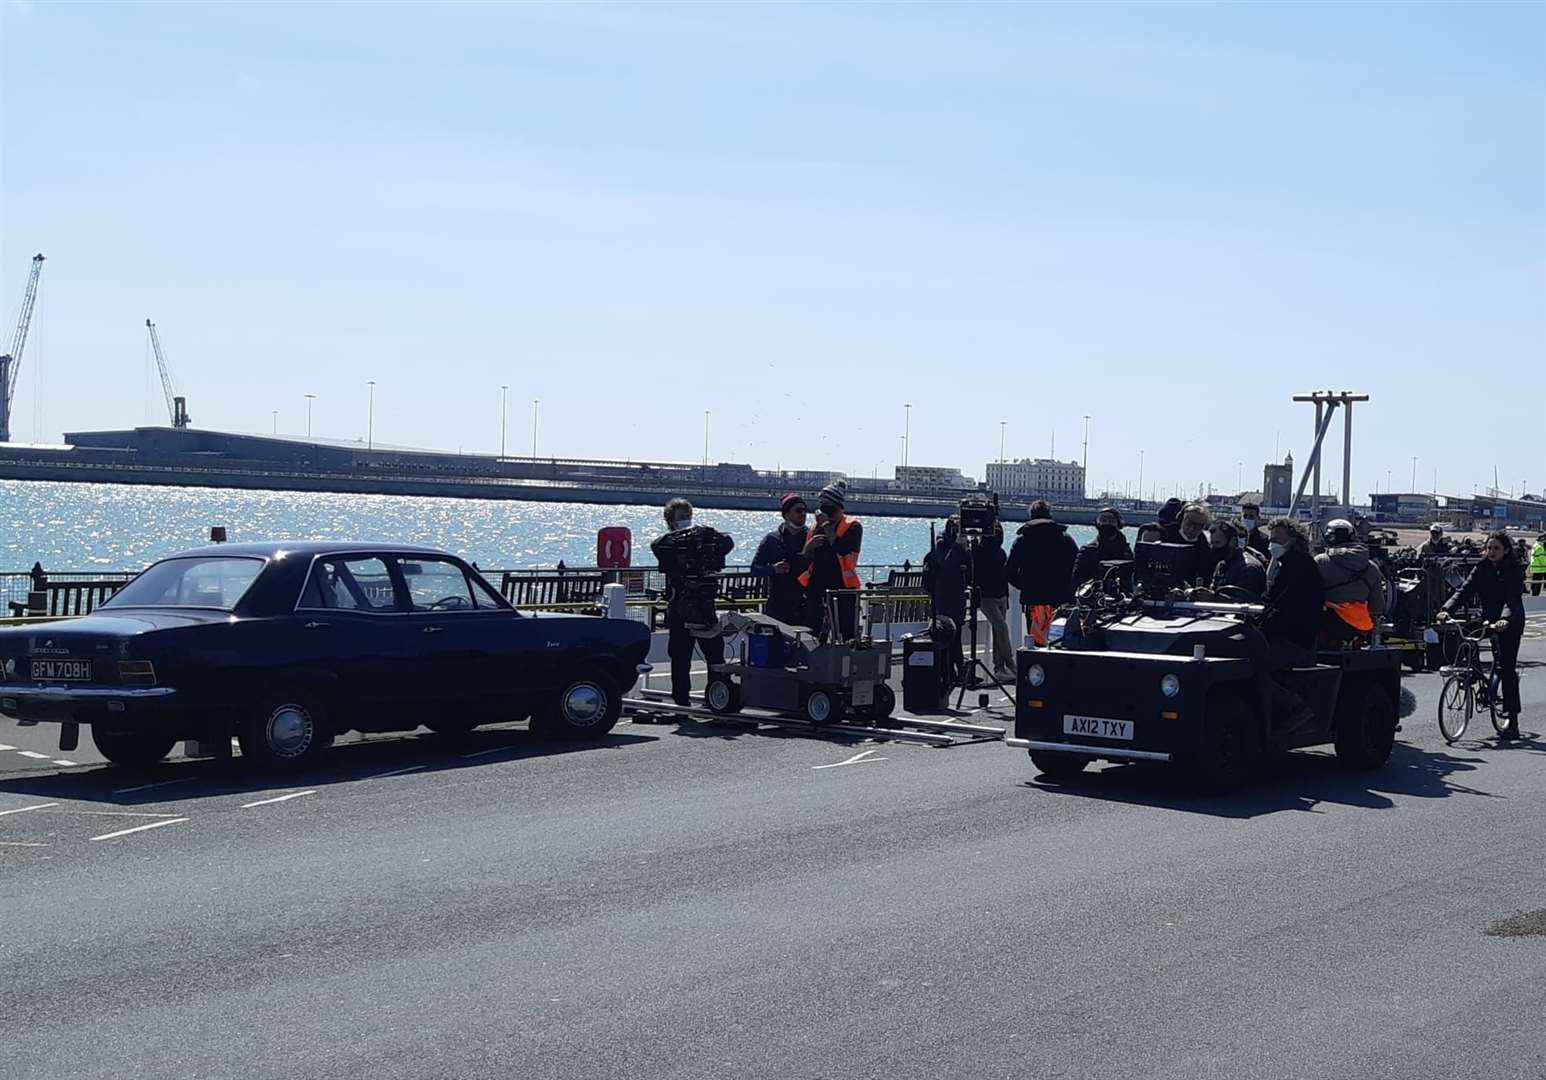 Filming took place in Dover this year for the series